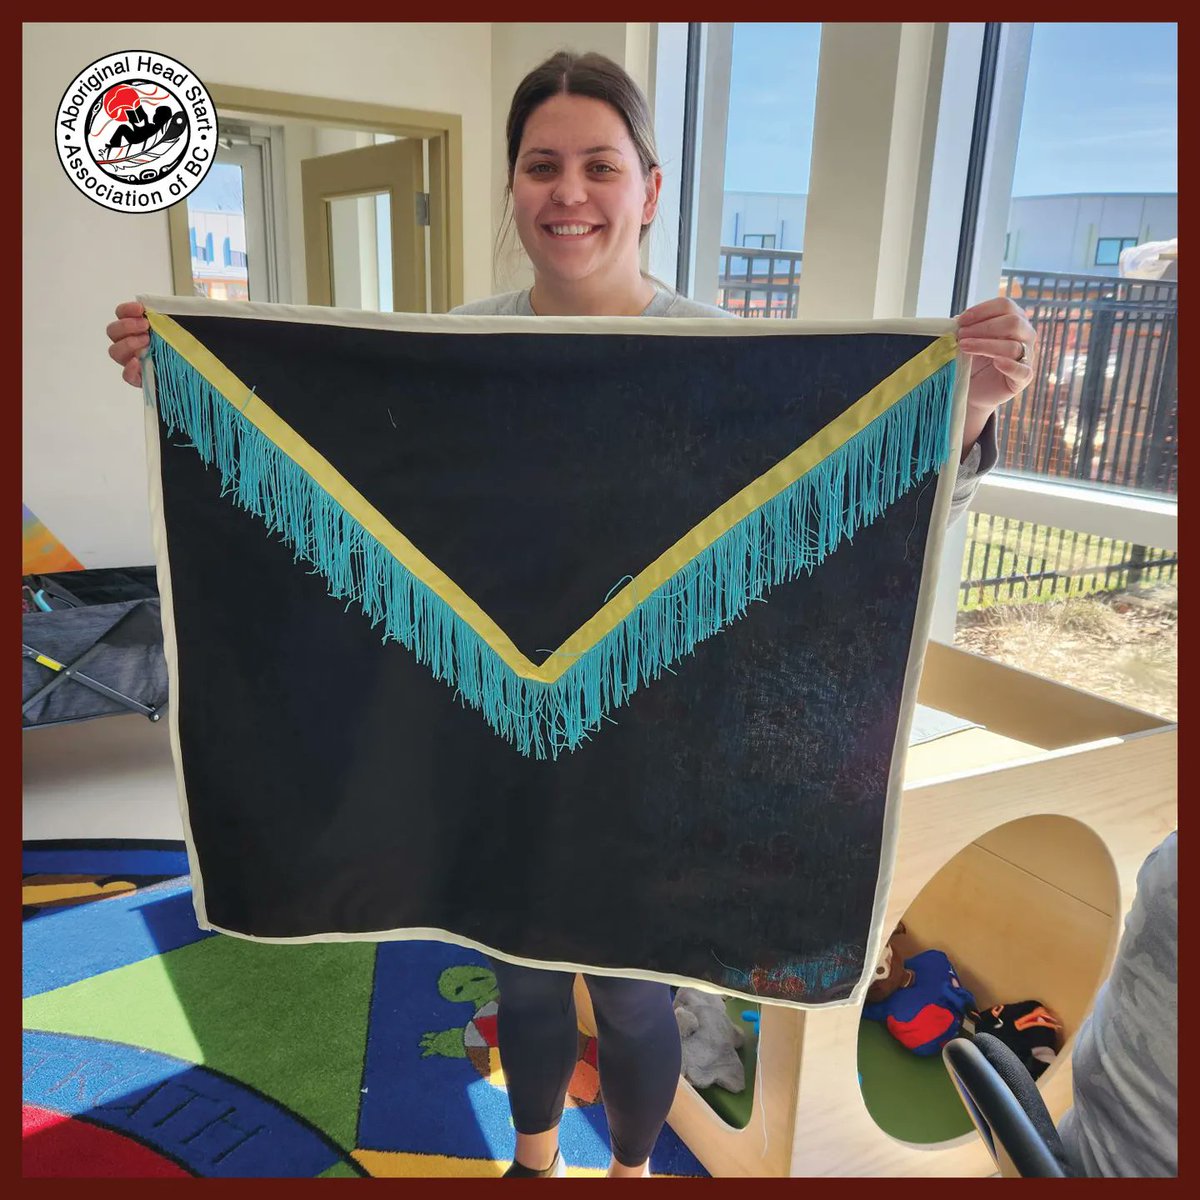 Little Cubs AHS is a brand new site located in the Aboriginal Housing Society in Prince George BC. One of 4 sites hosted by the Prince George Native Friendship Centre. Site staff have been team building by creating regalia for the program.#princegeorgebc #AboriginalHousingSociety